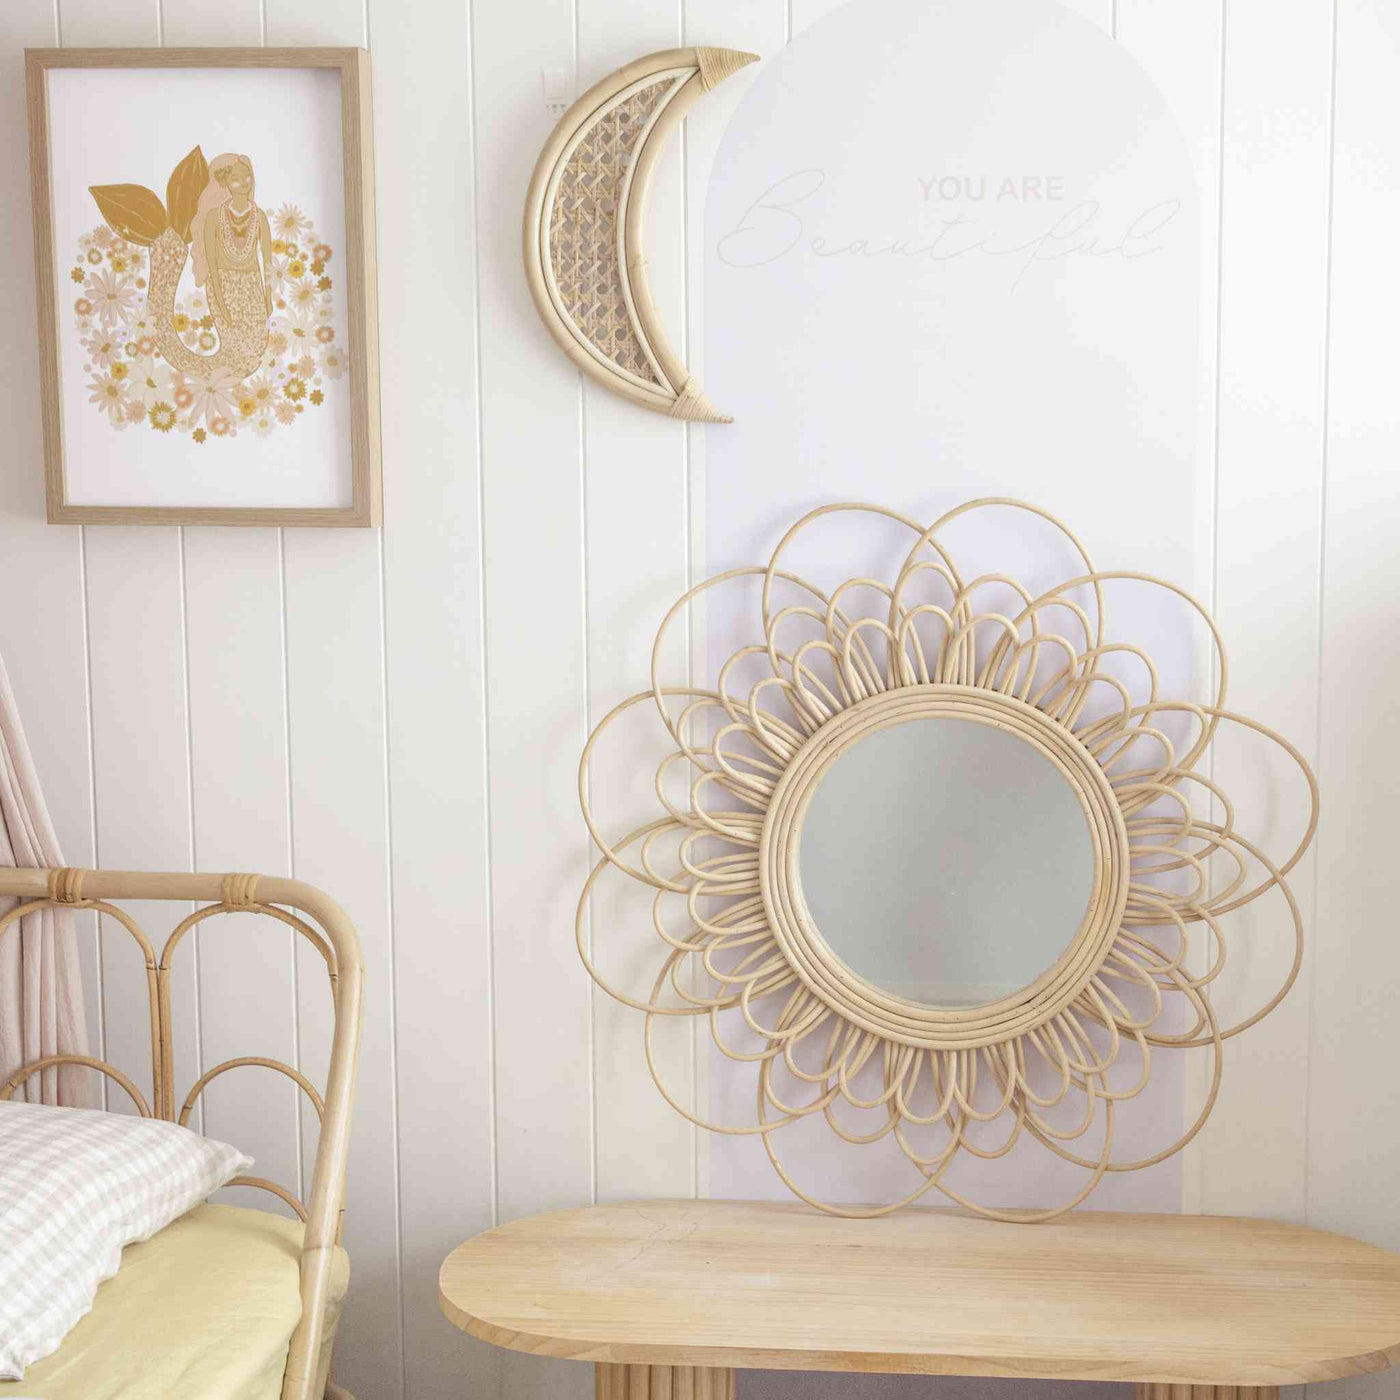 rattan flower mirror sitting on desk leaning against wall, paired with a rattan moon.